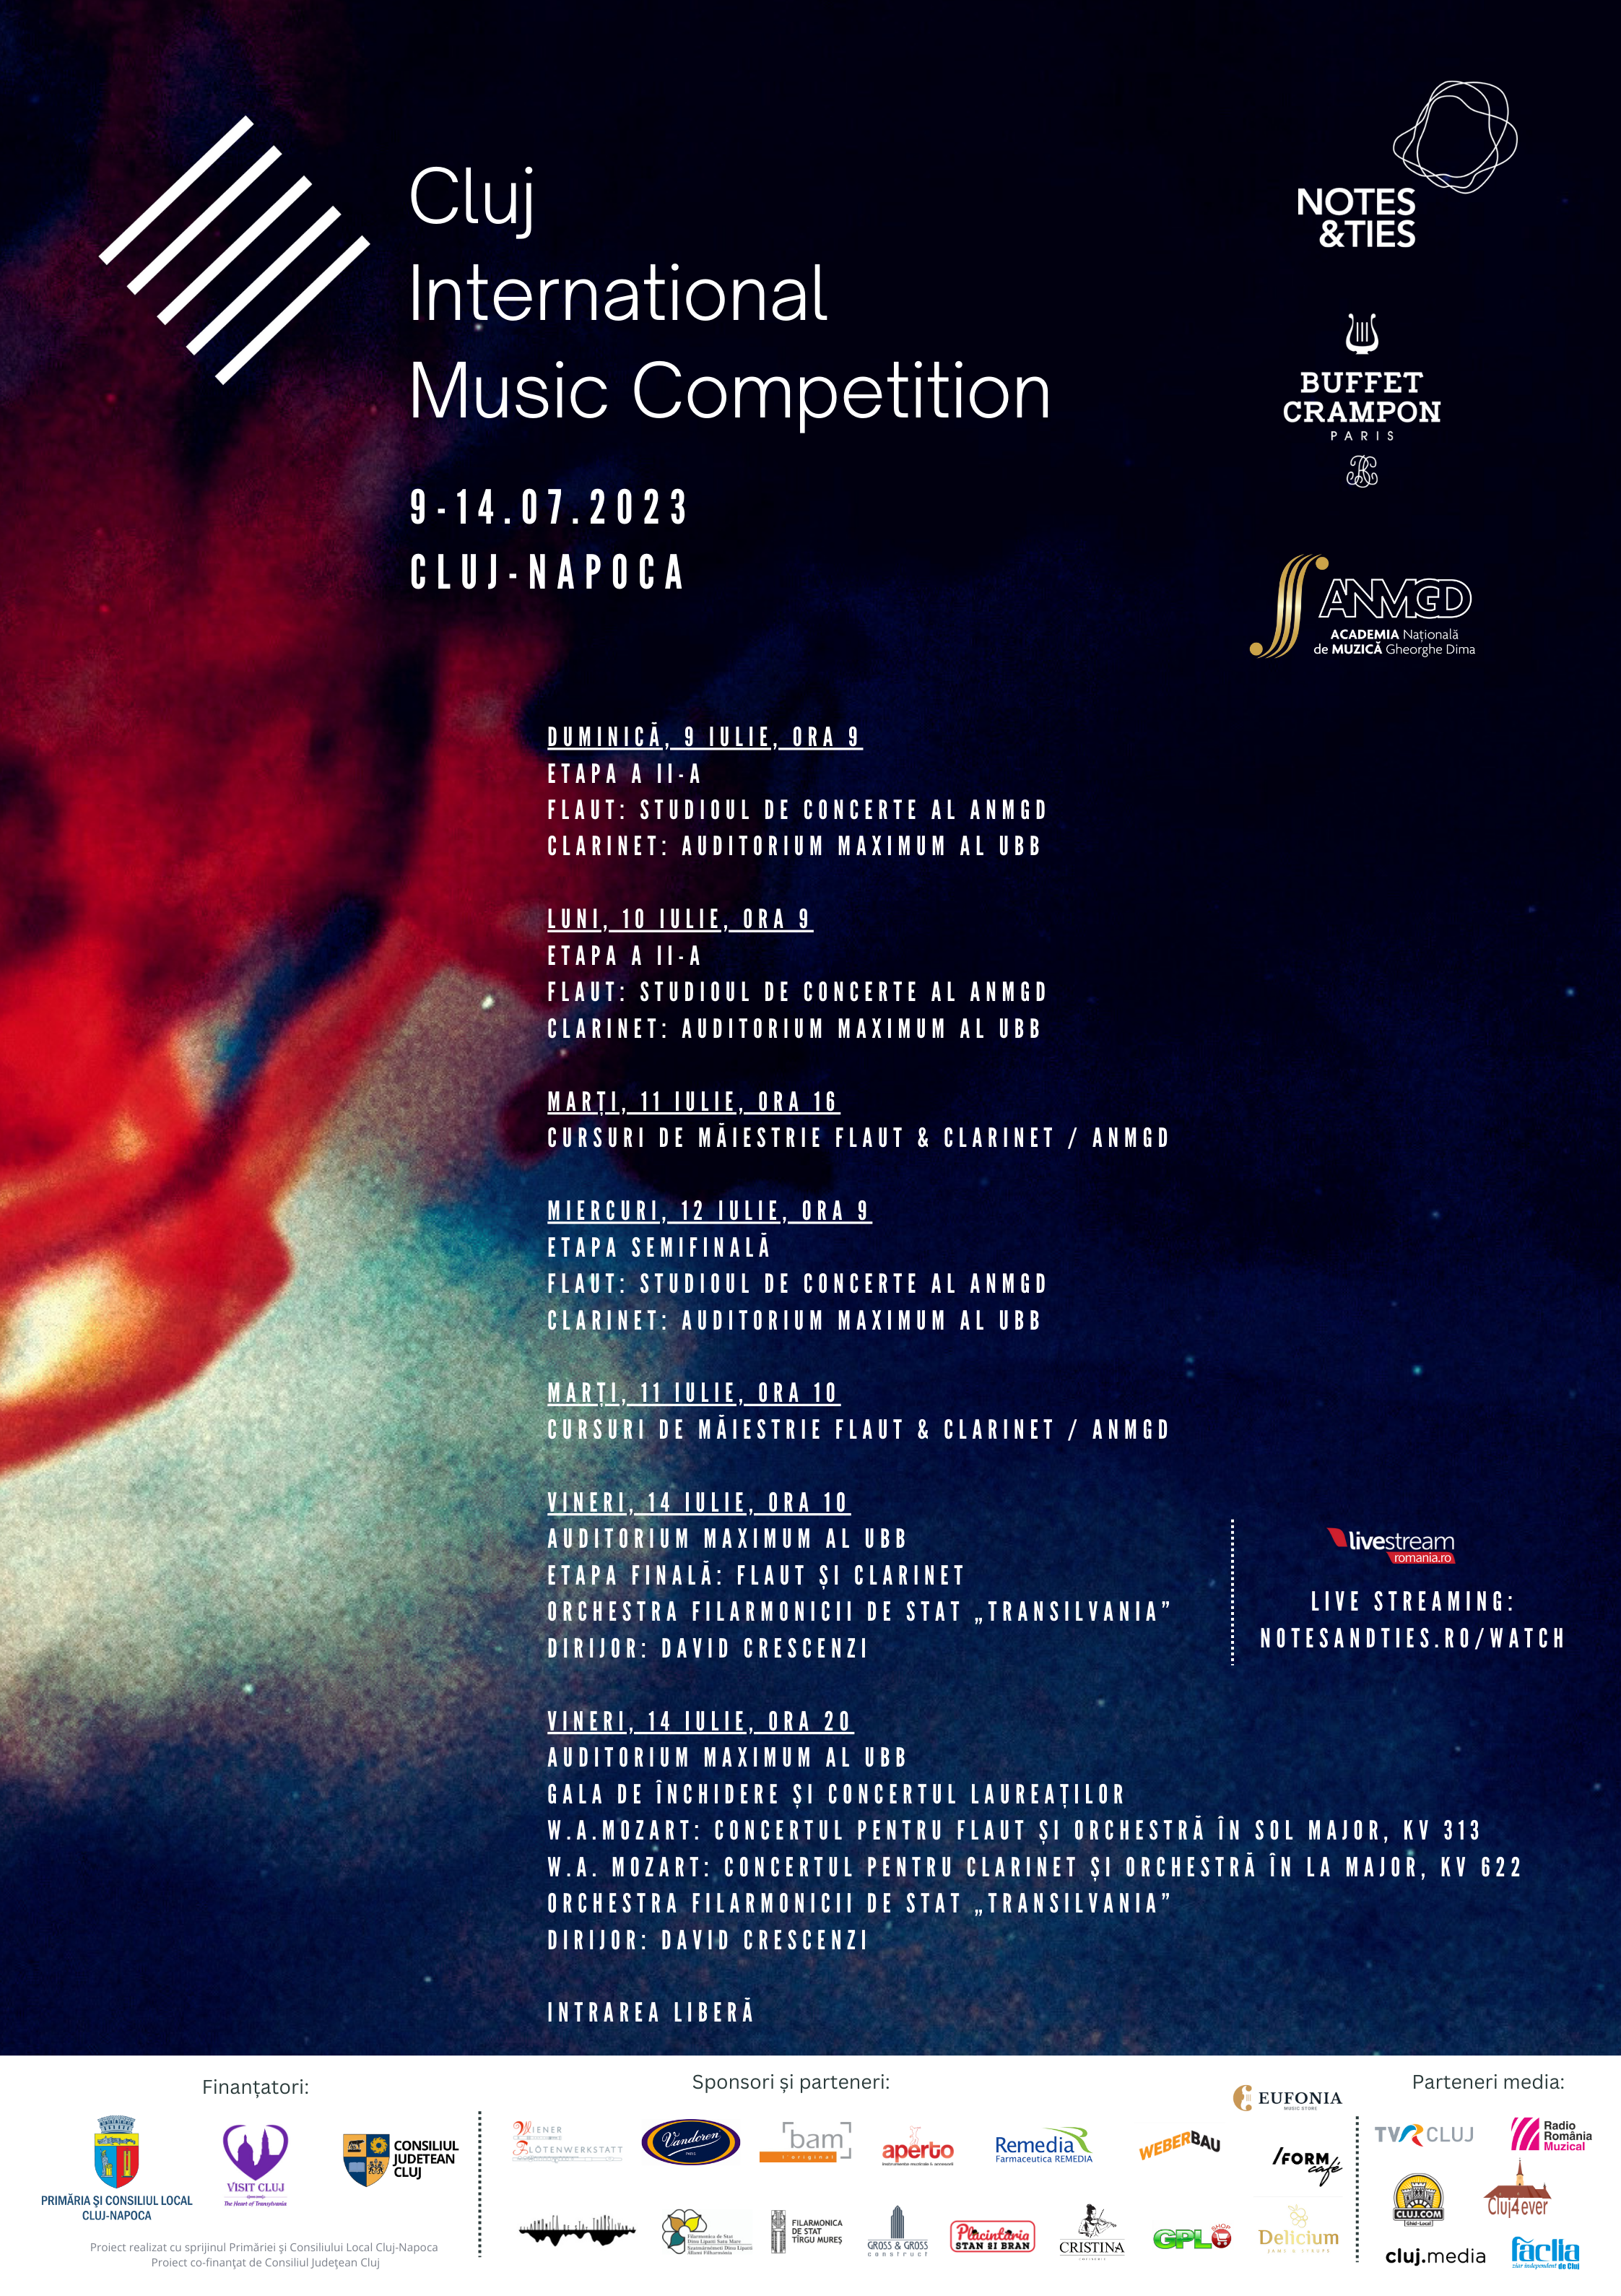 CLUJ INTERNATIONAL MUSIC COMPETITION 2023